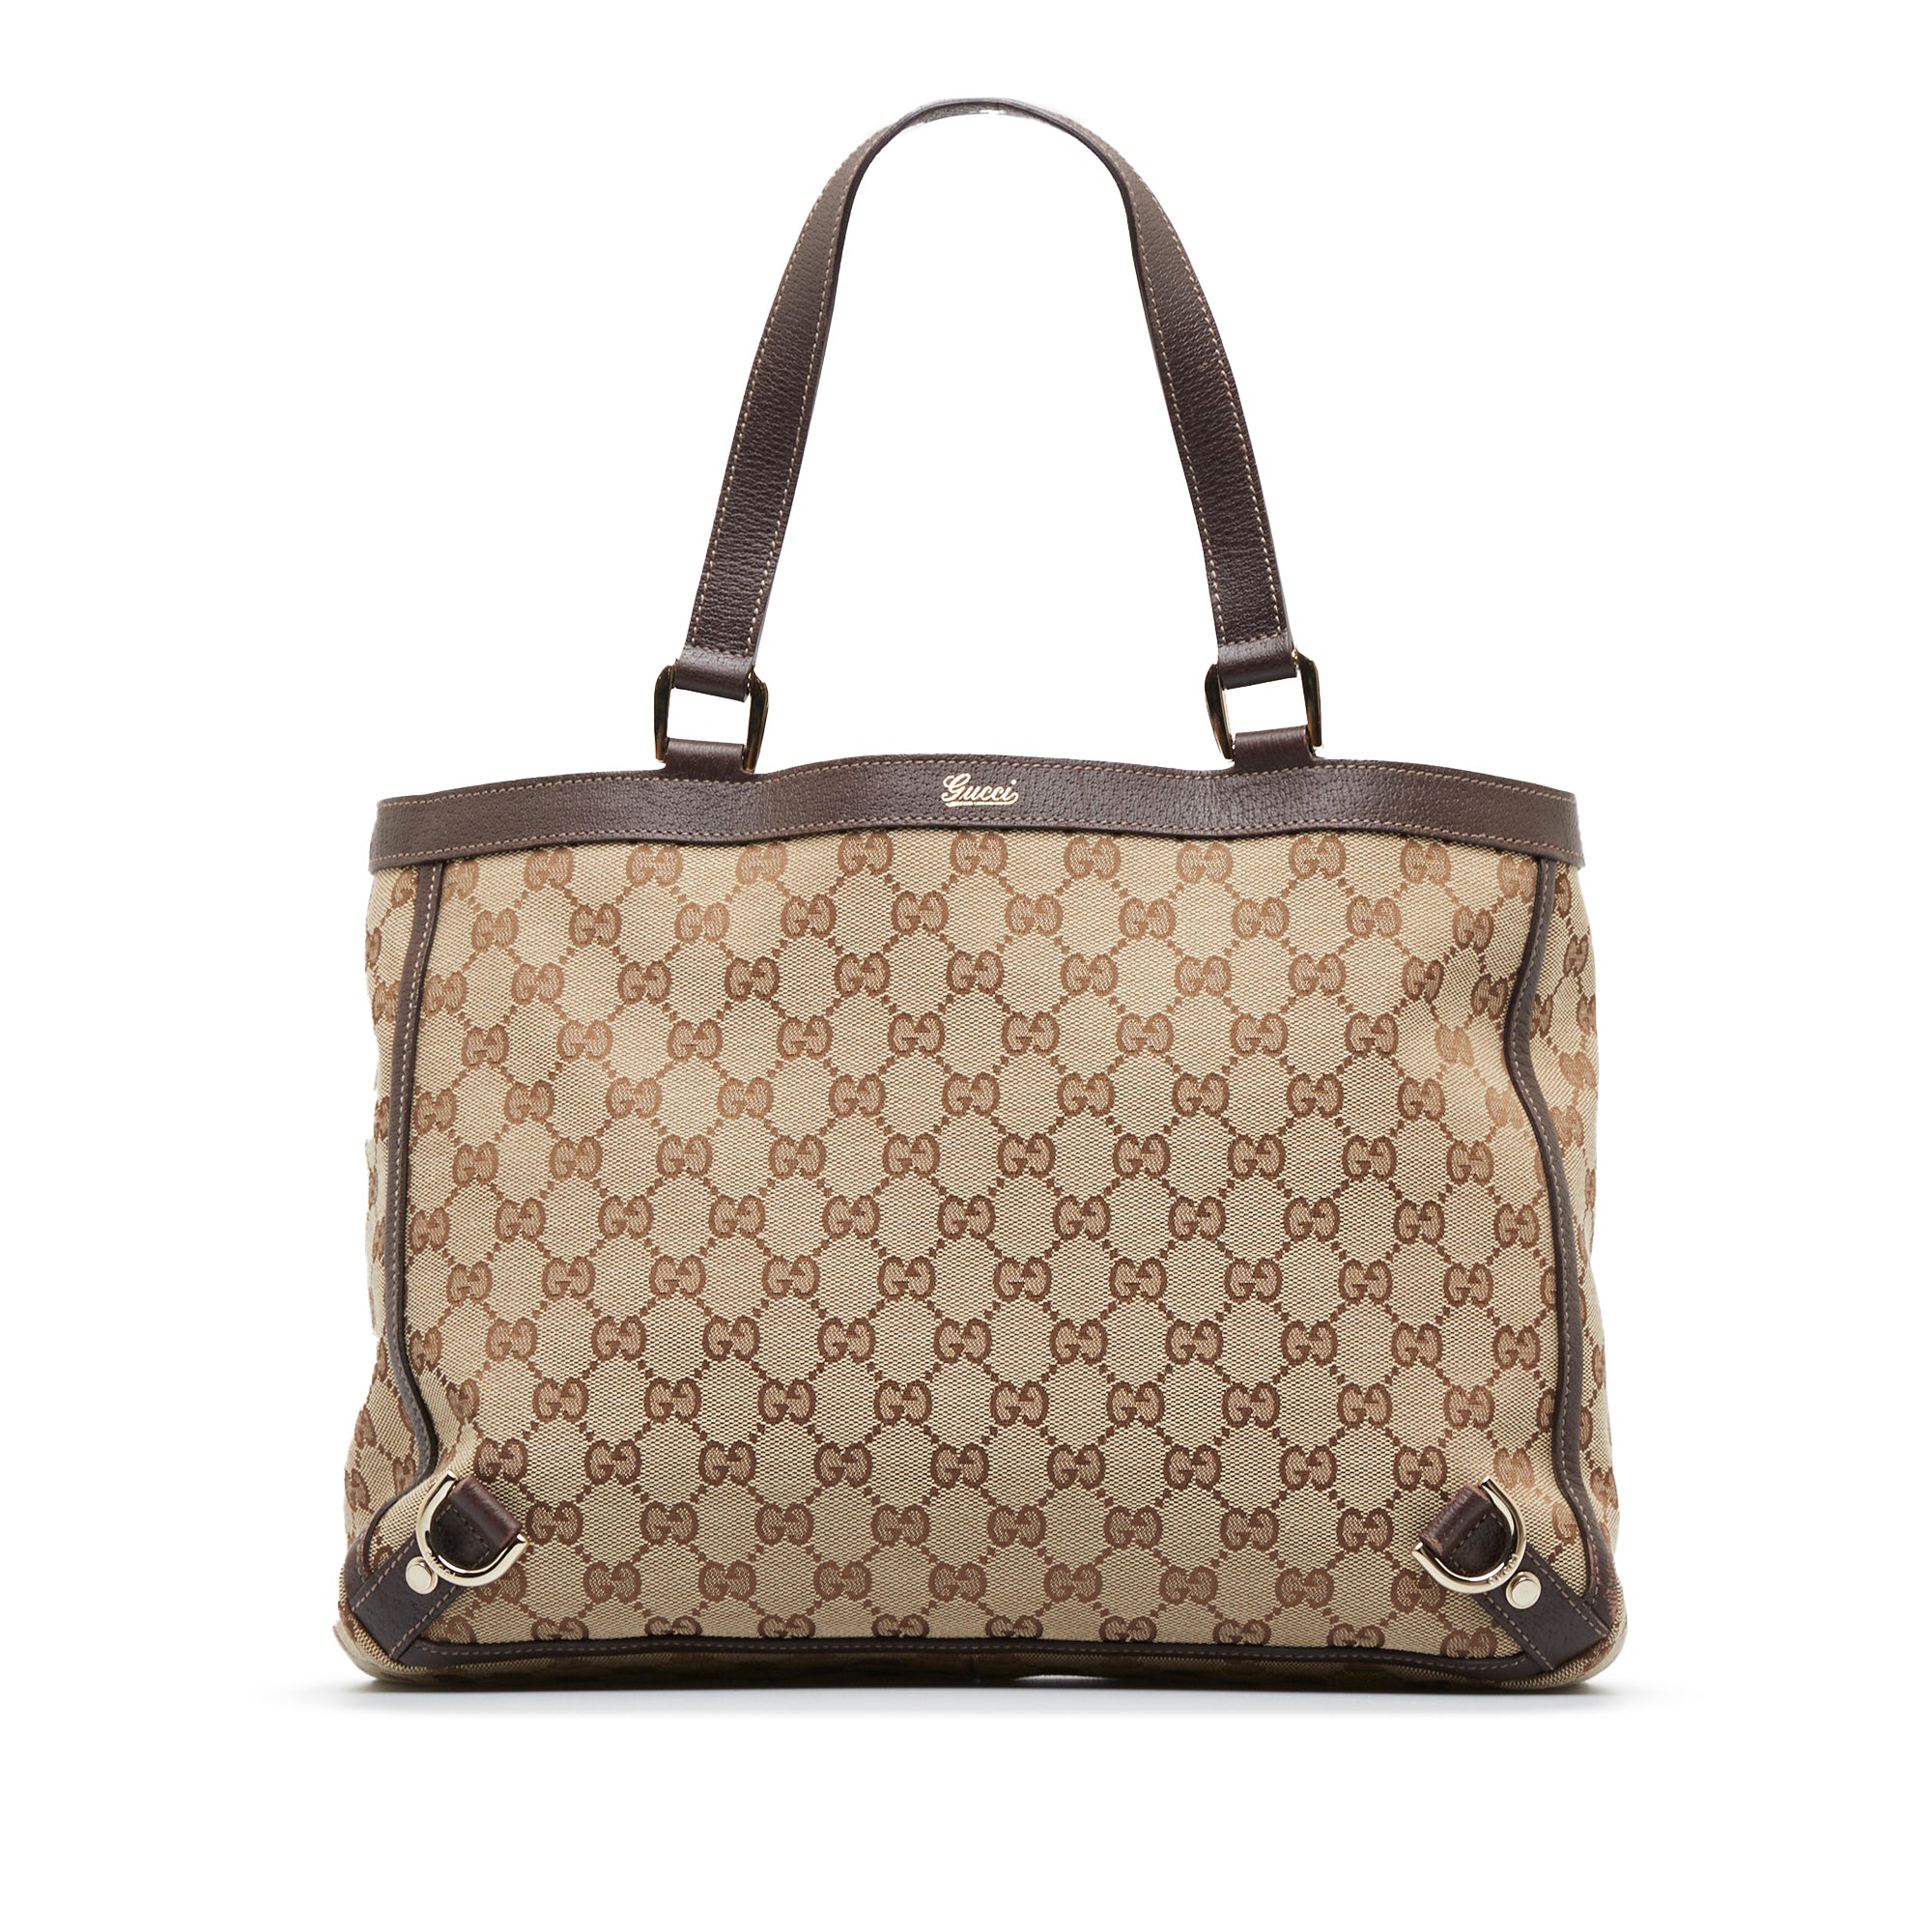 SarahbeebeShops Revival - Brown Gucci GG Canvas Abbey D  Ring Tote Bag -  Gucci GG monogram apple print large tote bag